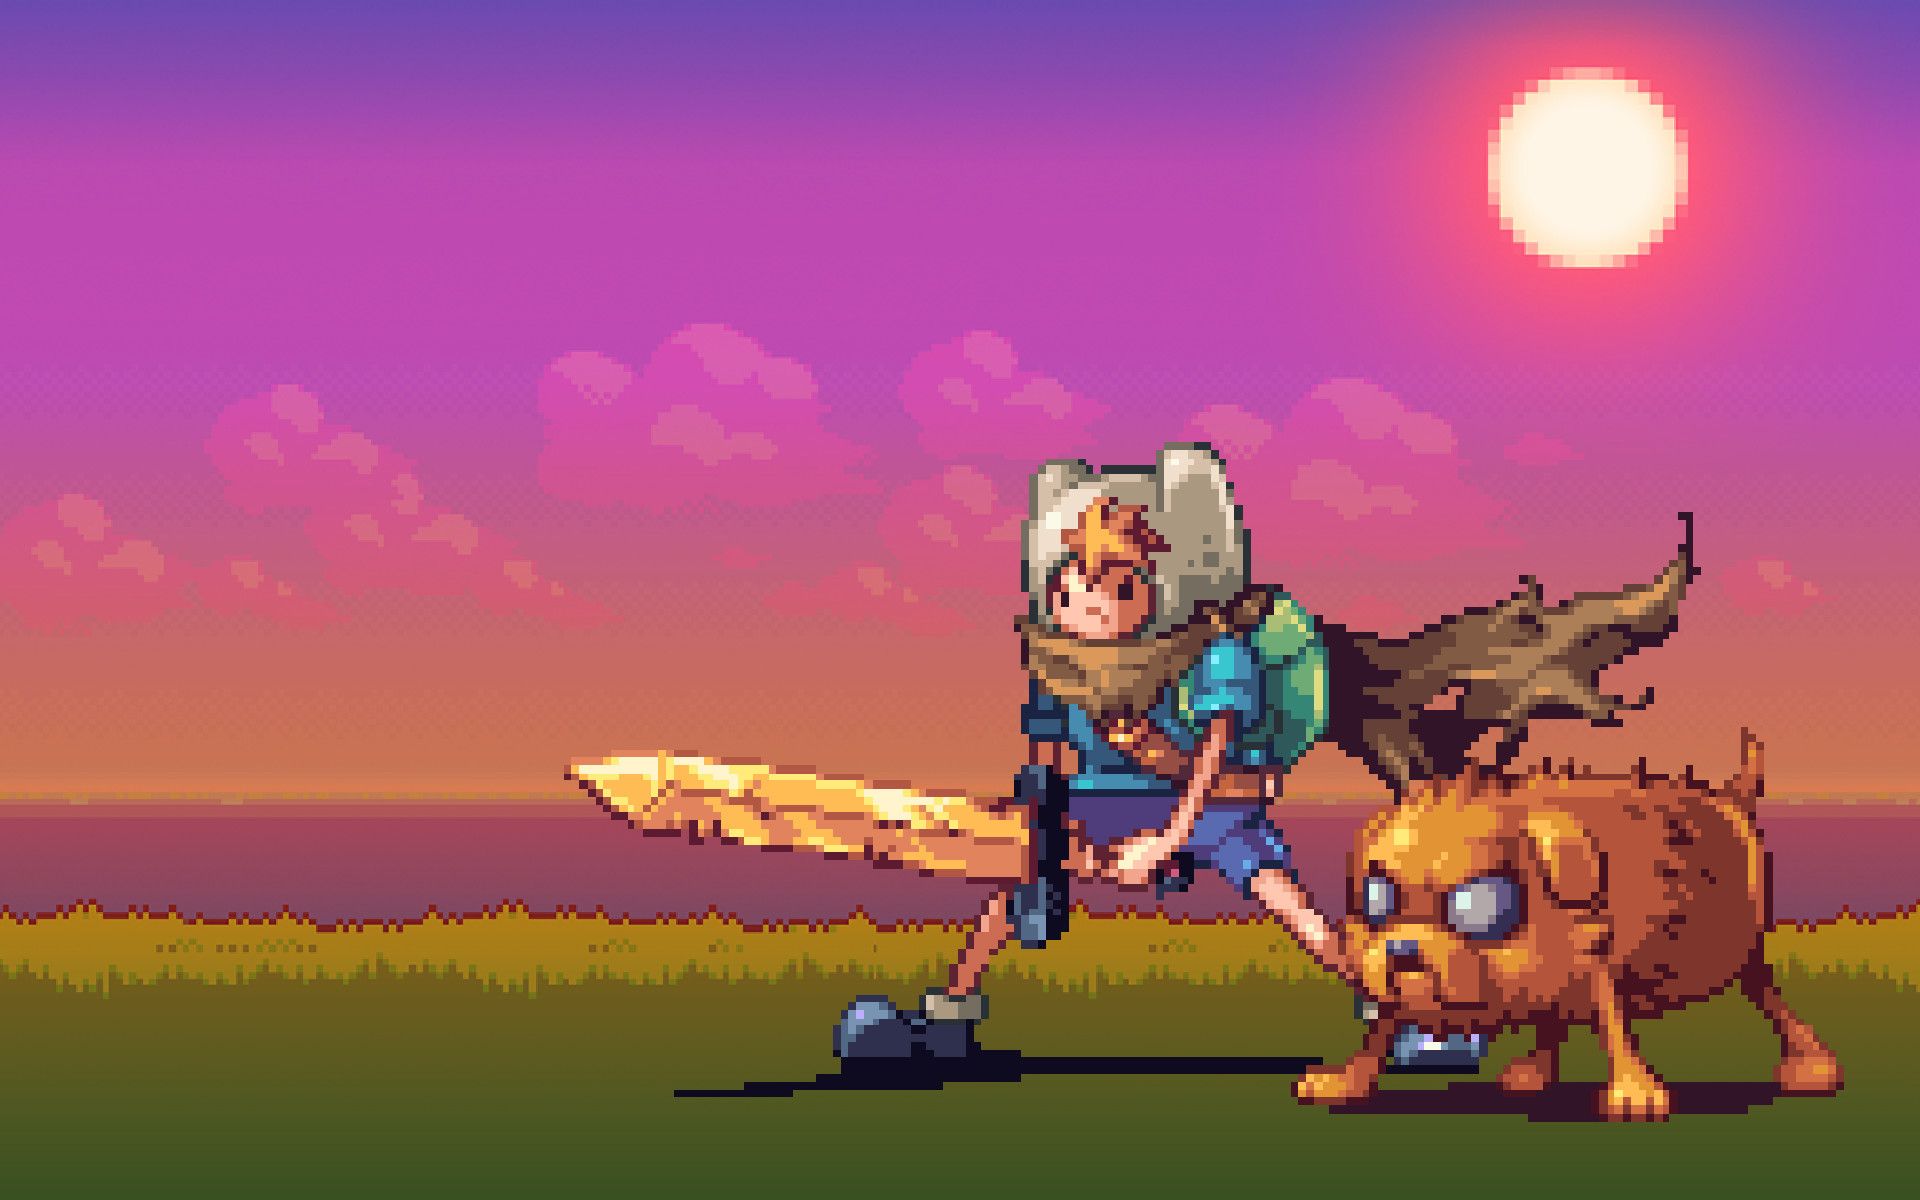 Finn and Jake are ready to take on the world in this pixel art wallpaper. - Pixel art